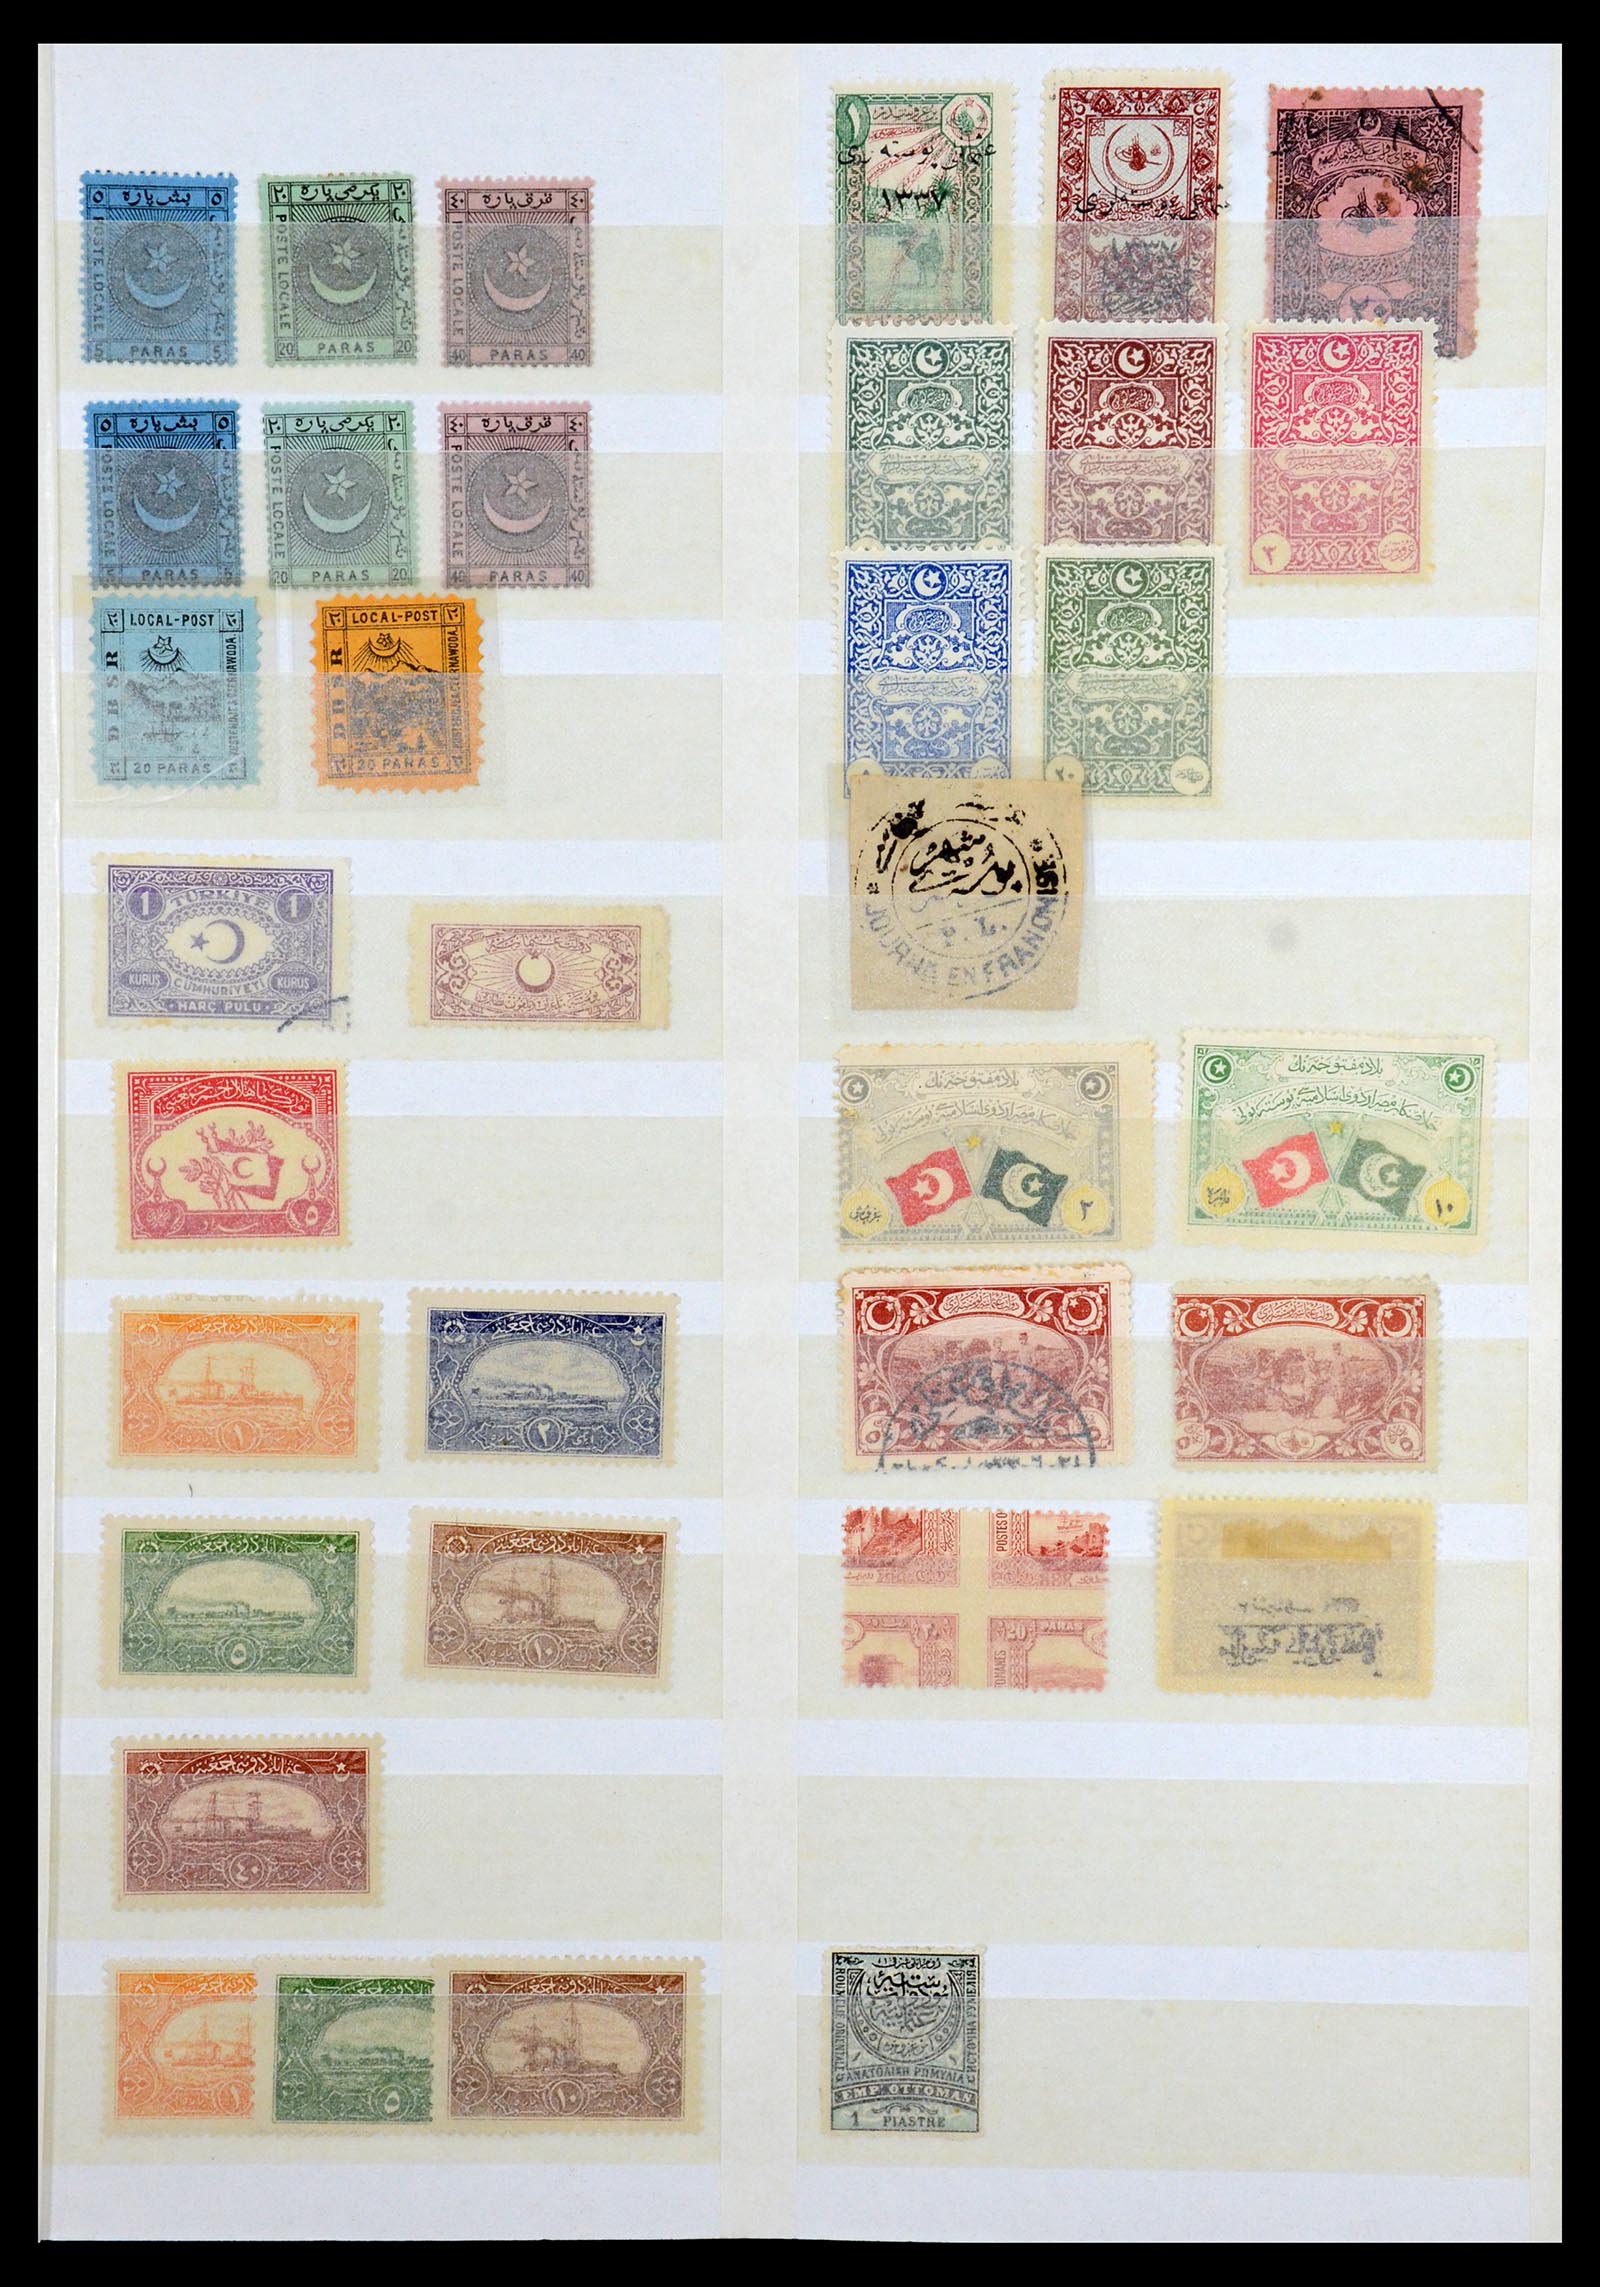 36498 040 - Stamp collection 36498 Palestine and Israel cancels 1880-1970.